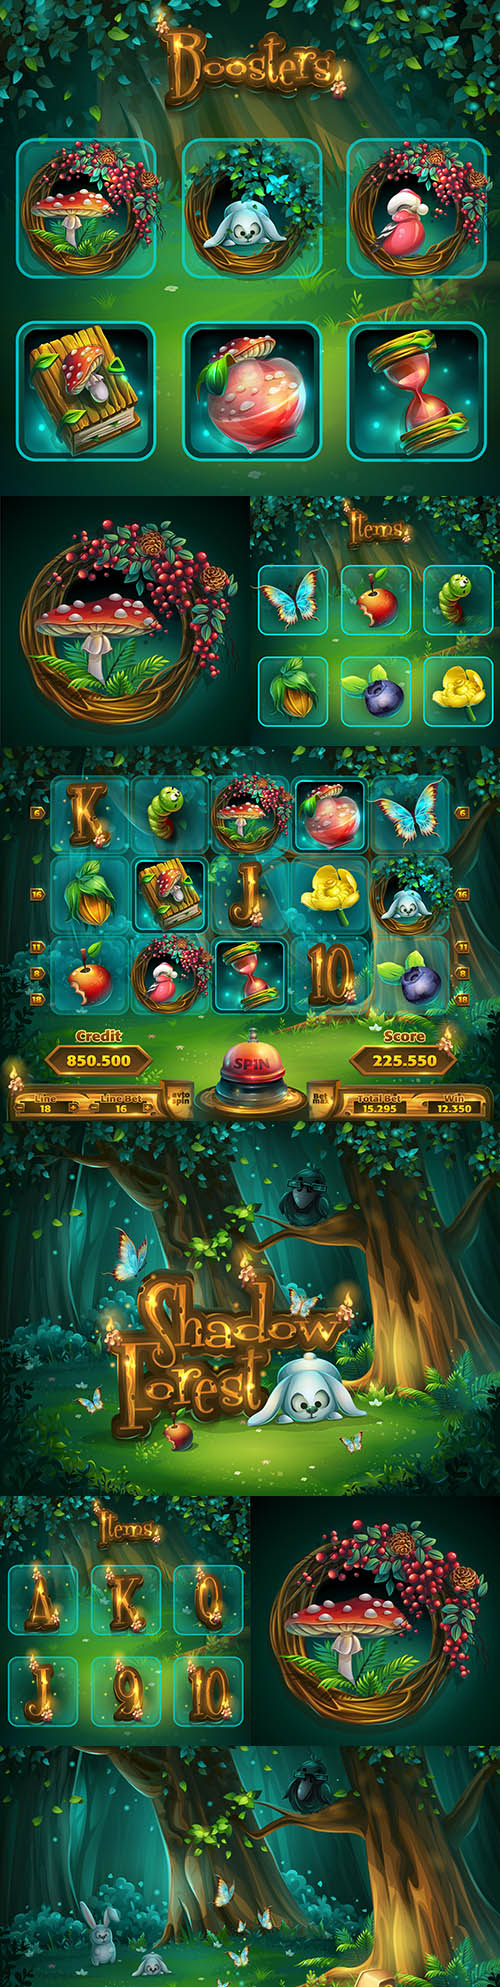 Set of computer game interface items shadowy forest
